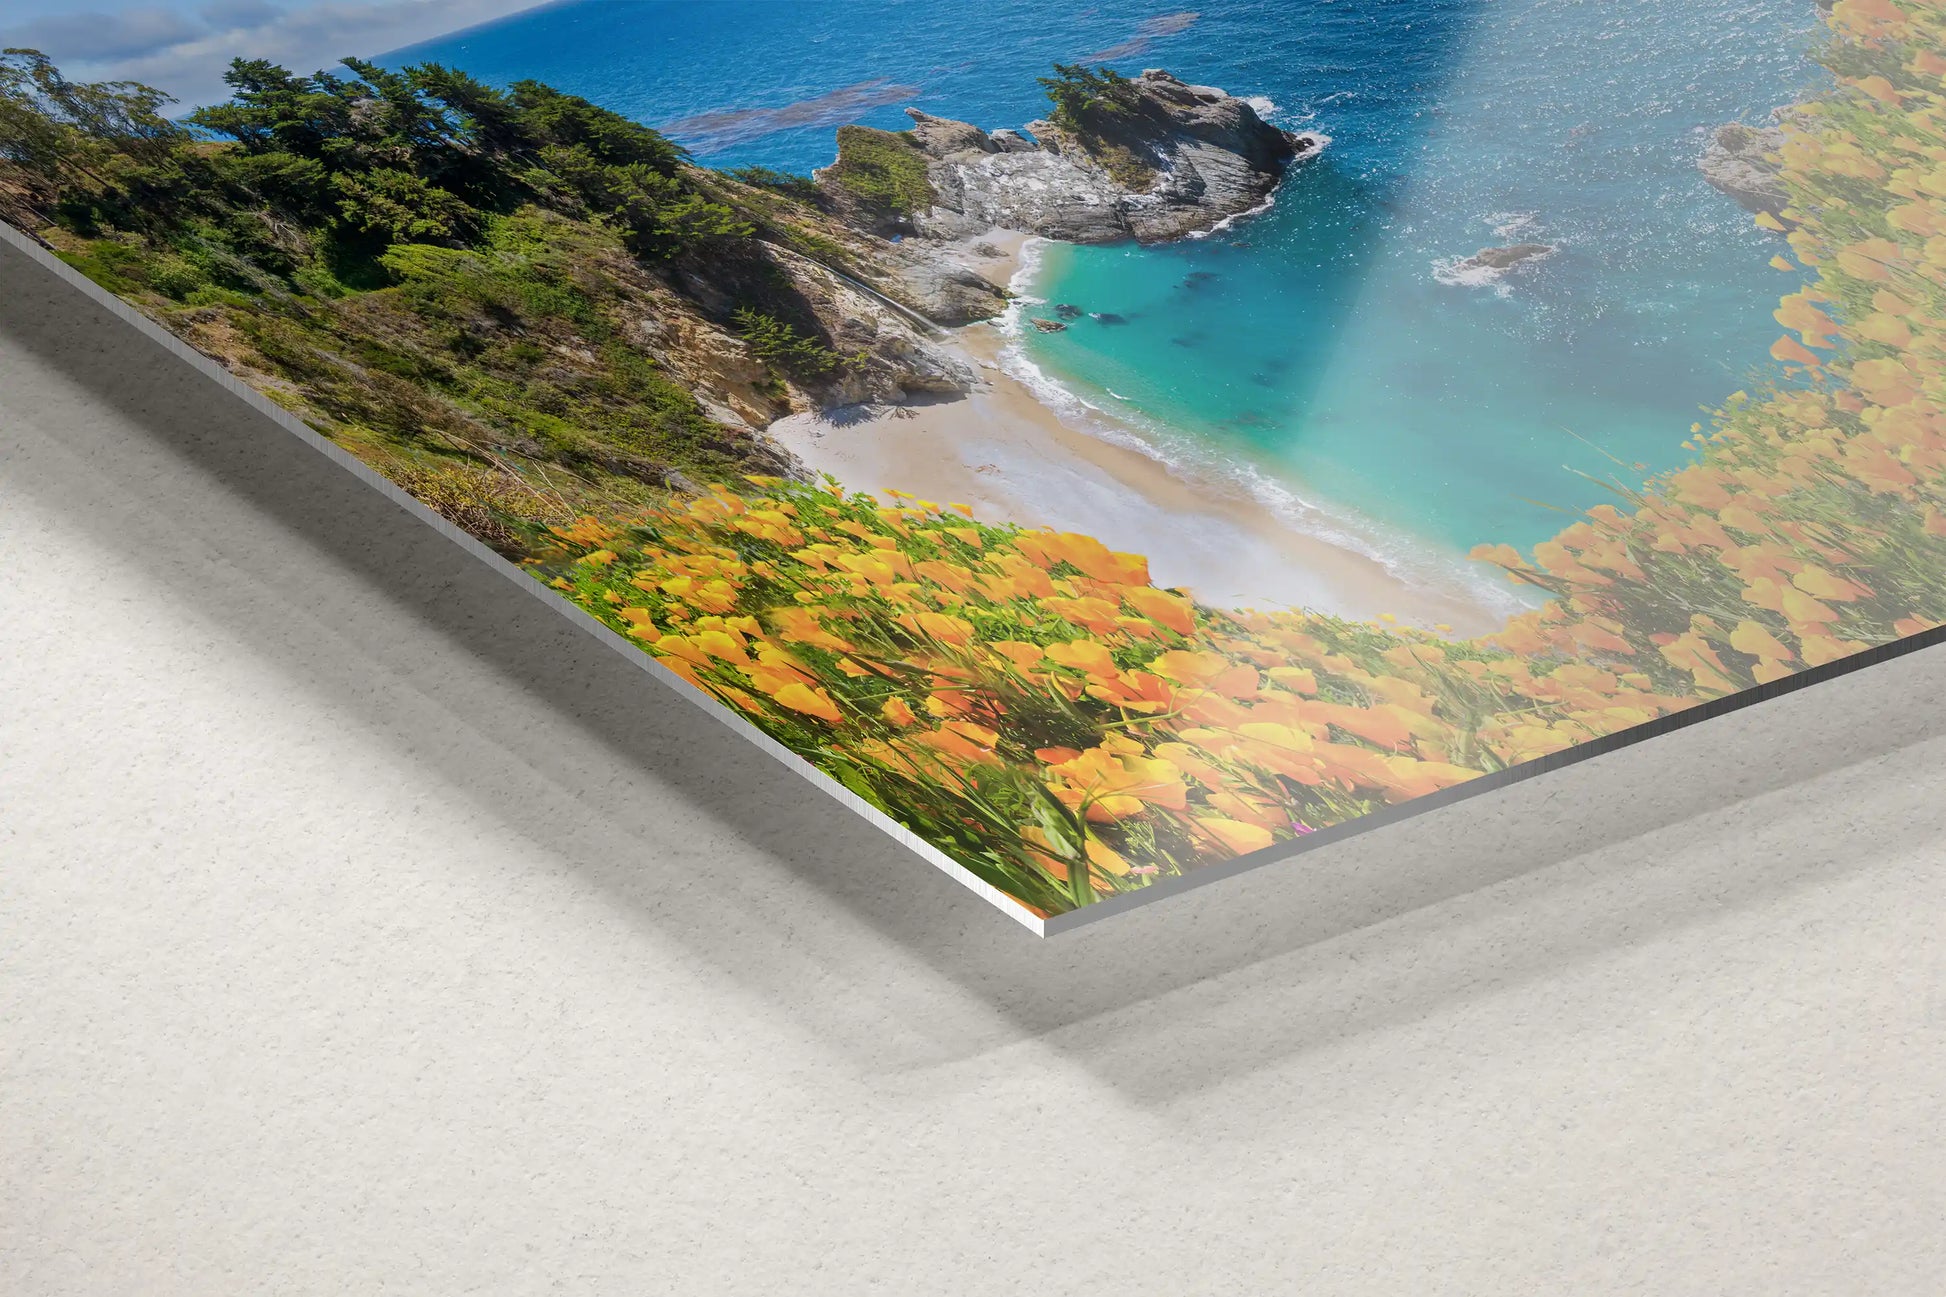 A metal print print of McWay Falls in Big Sur, resting on a floor, showcasing the waterfall, blue sea, and orange flowers spilling off the edge.